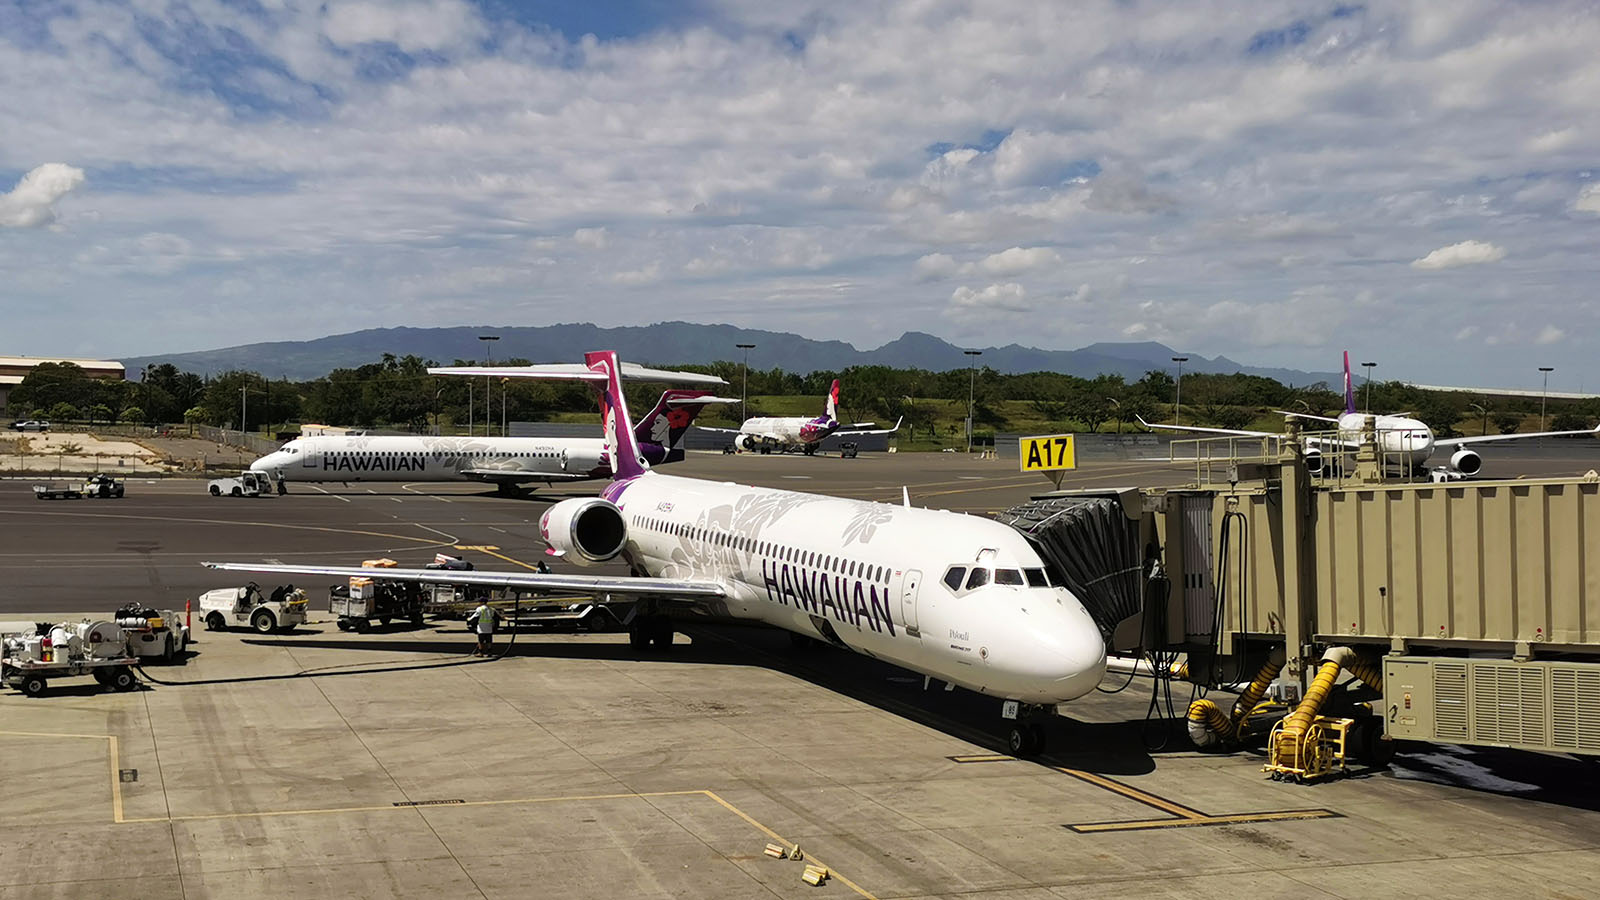 Aircraft parked at Honolulu Airport